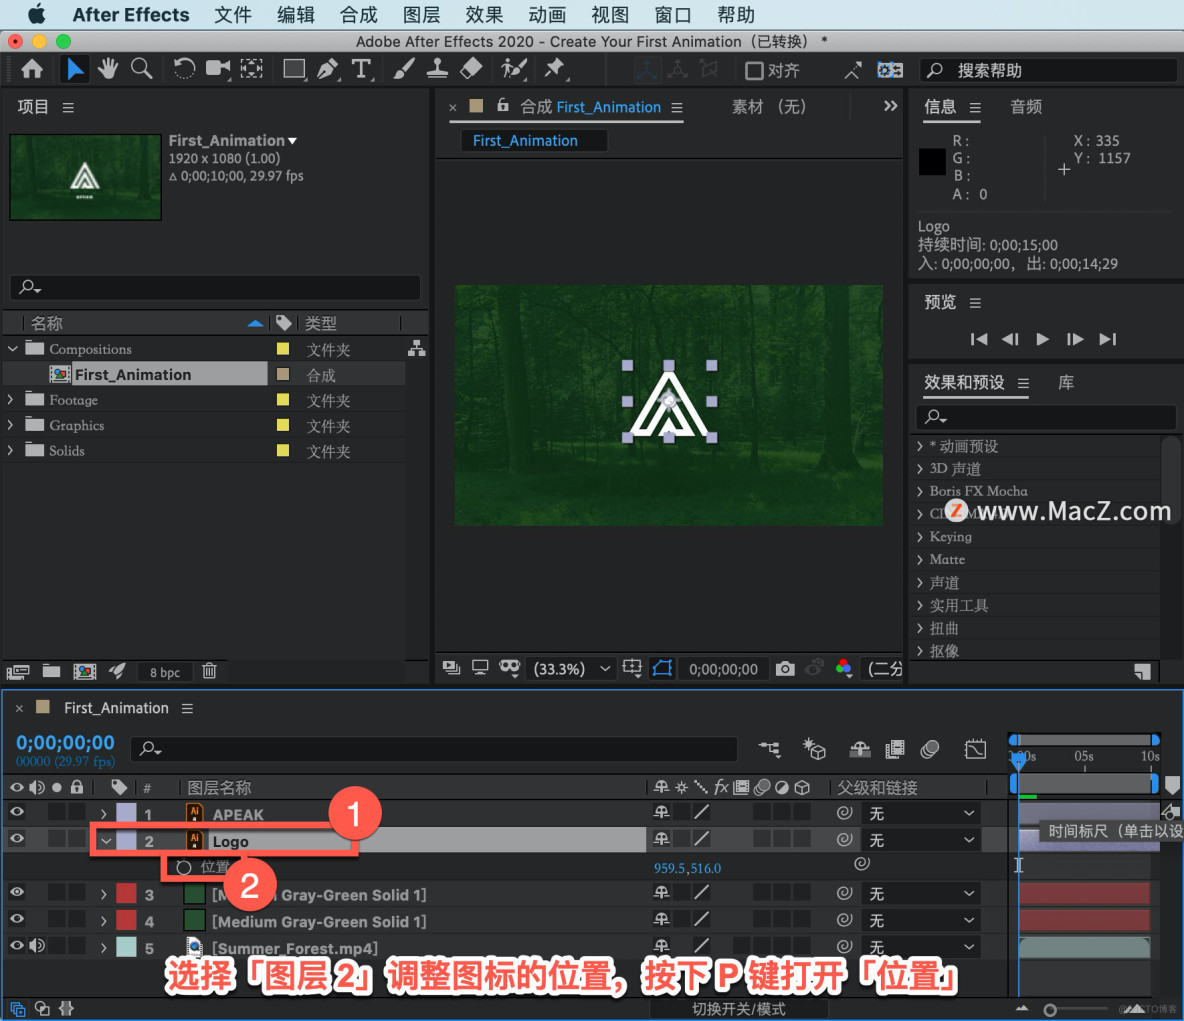 After Effects 教程，如何在 After Effects 中创建动画？_AE